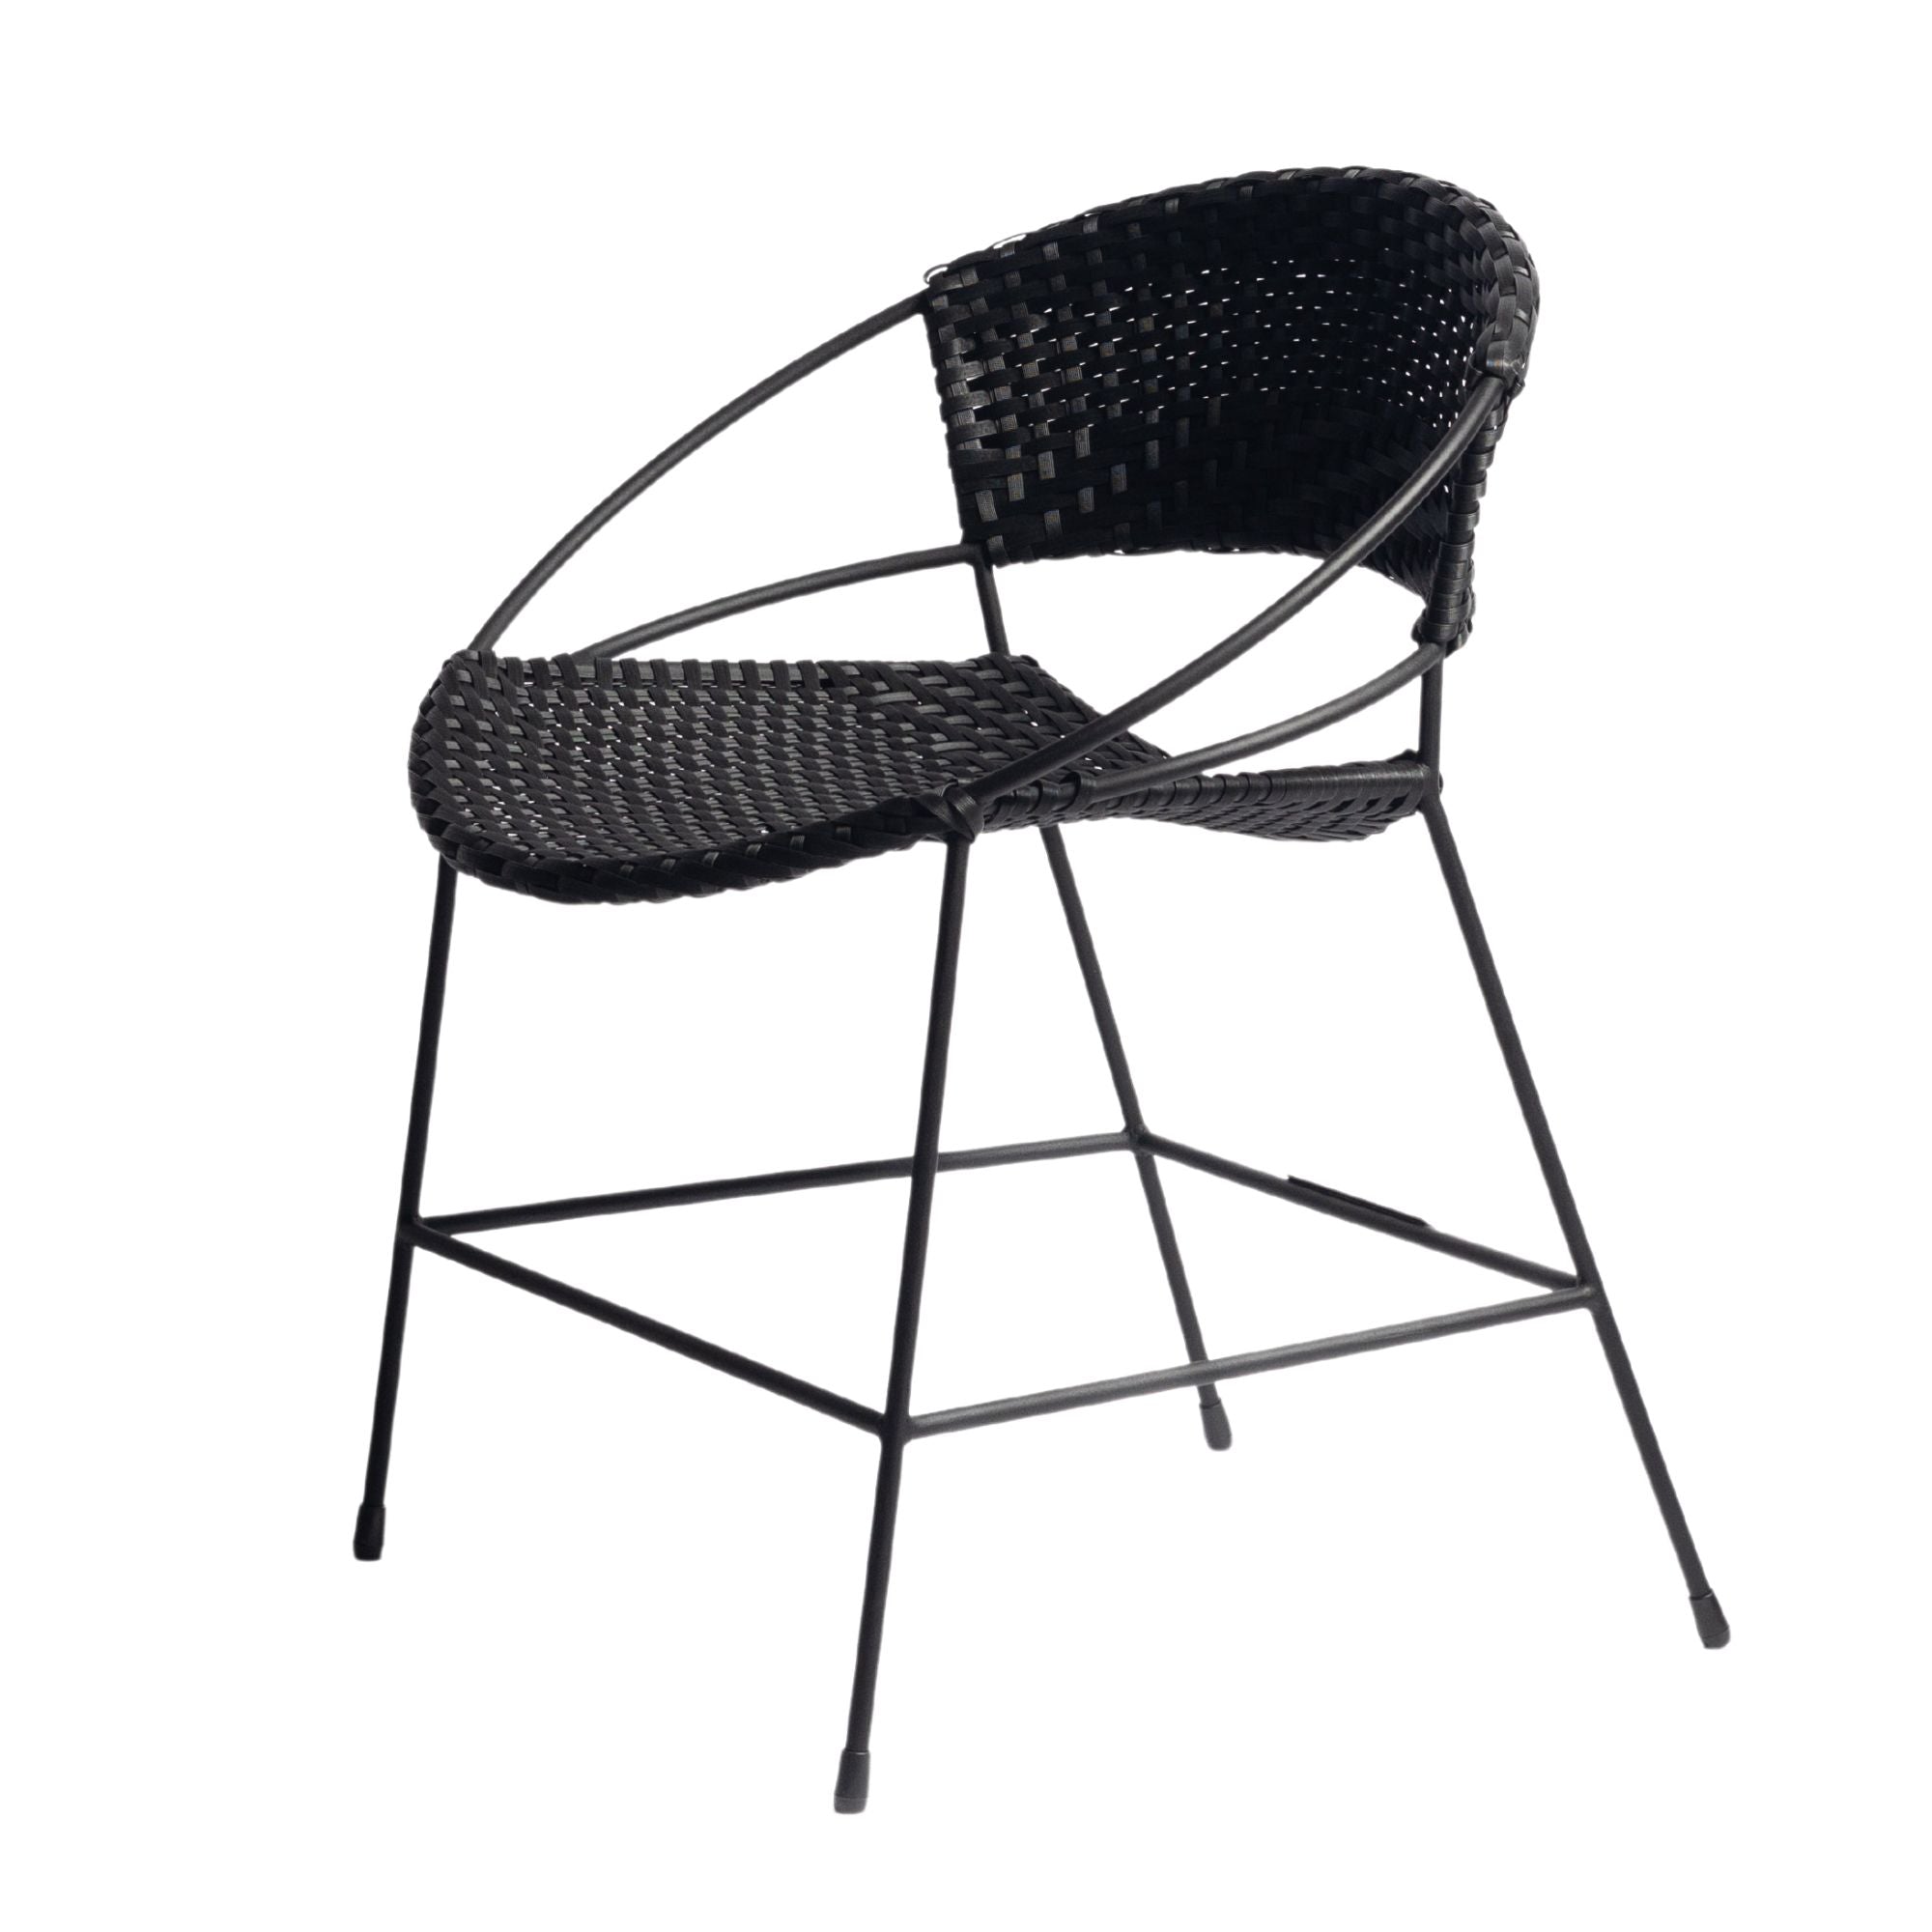 Woven Outdoor Dining Chair - Coal